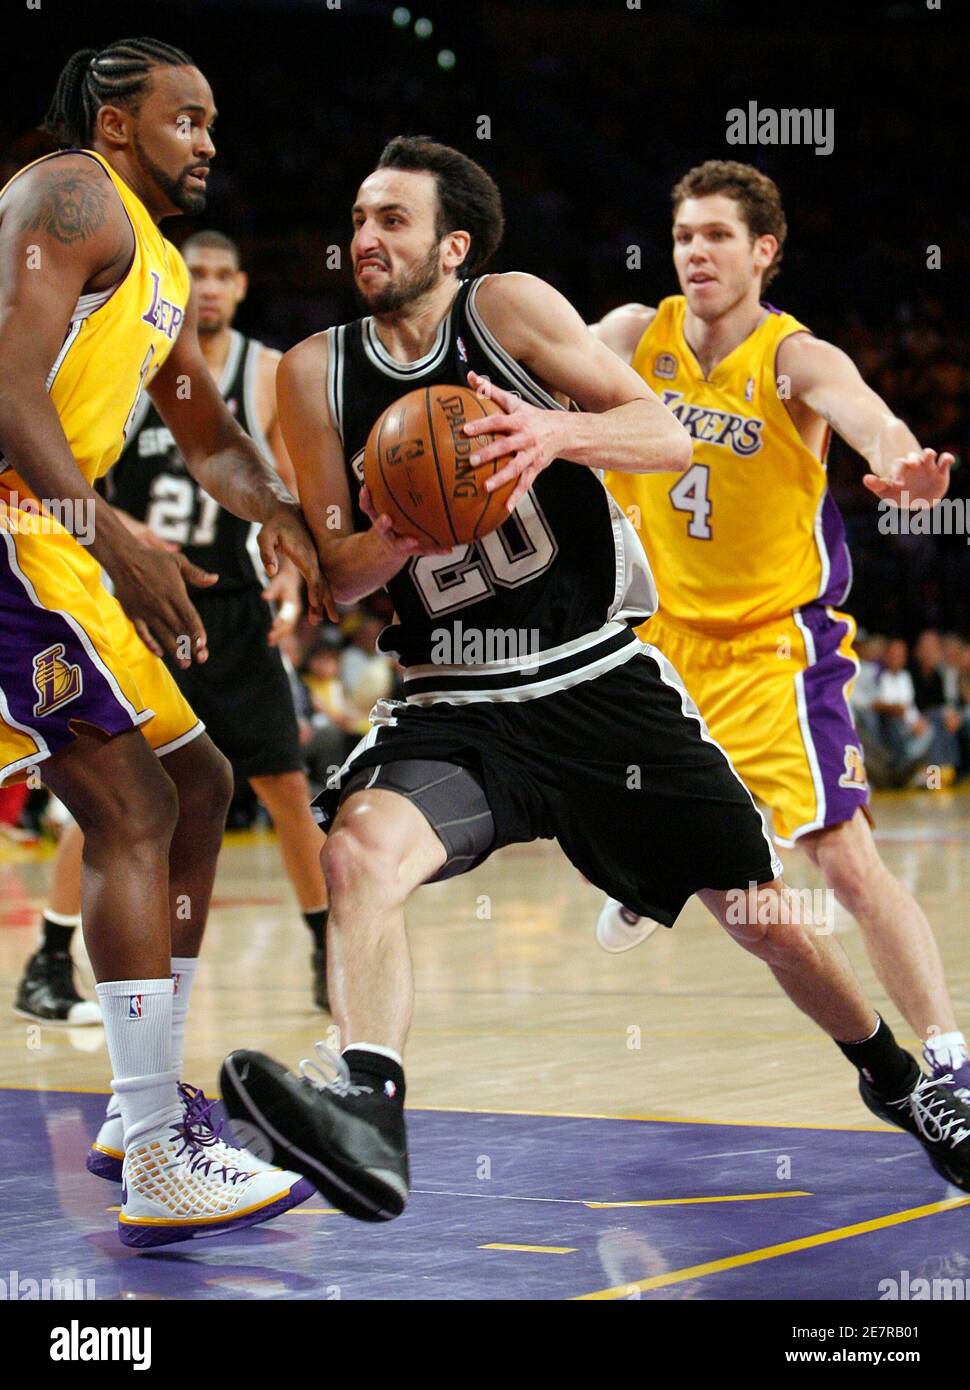 San Antonio Spurs Manu Ginobili (C) drives to the basket past Los Angeles Lakers Luke Walton (R) and Ronny Turiaf (L) during Game 5 of their NBA Western Conference final basketball playoff series in Los Angeles, May 29, 2008.     REUTERS/Gus Ruelas (UNITED STATES) Stock Photo